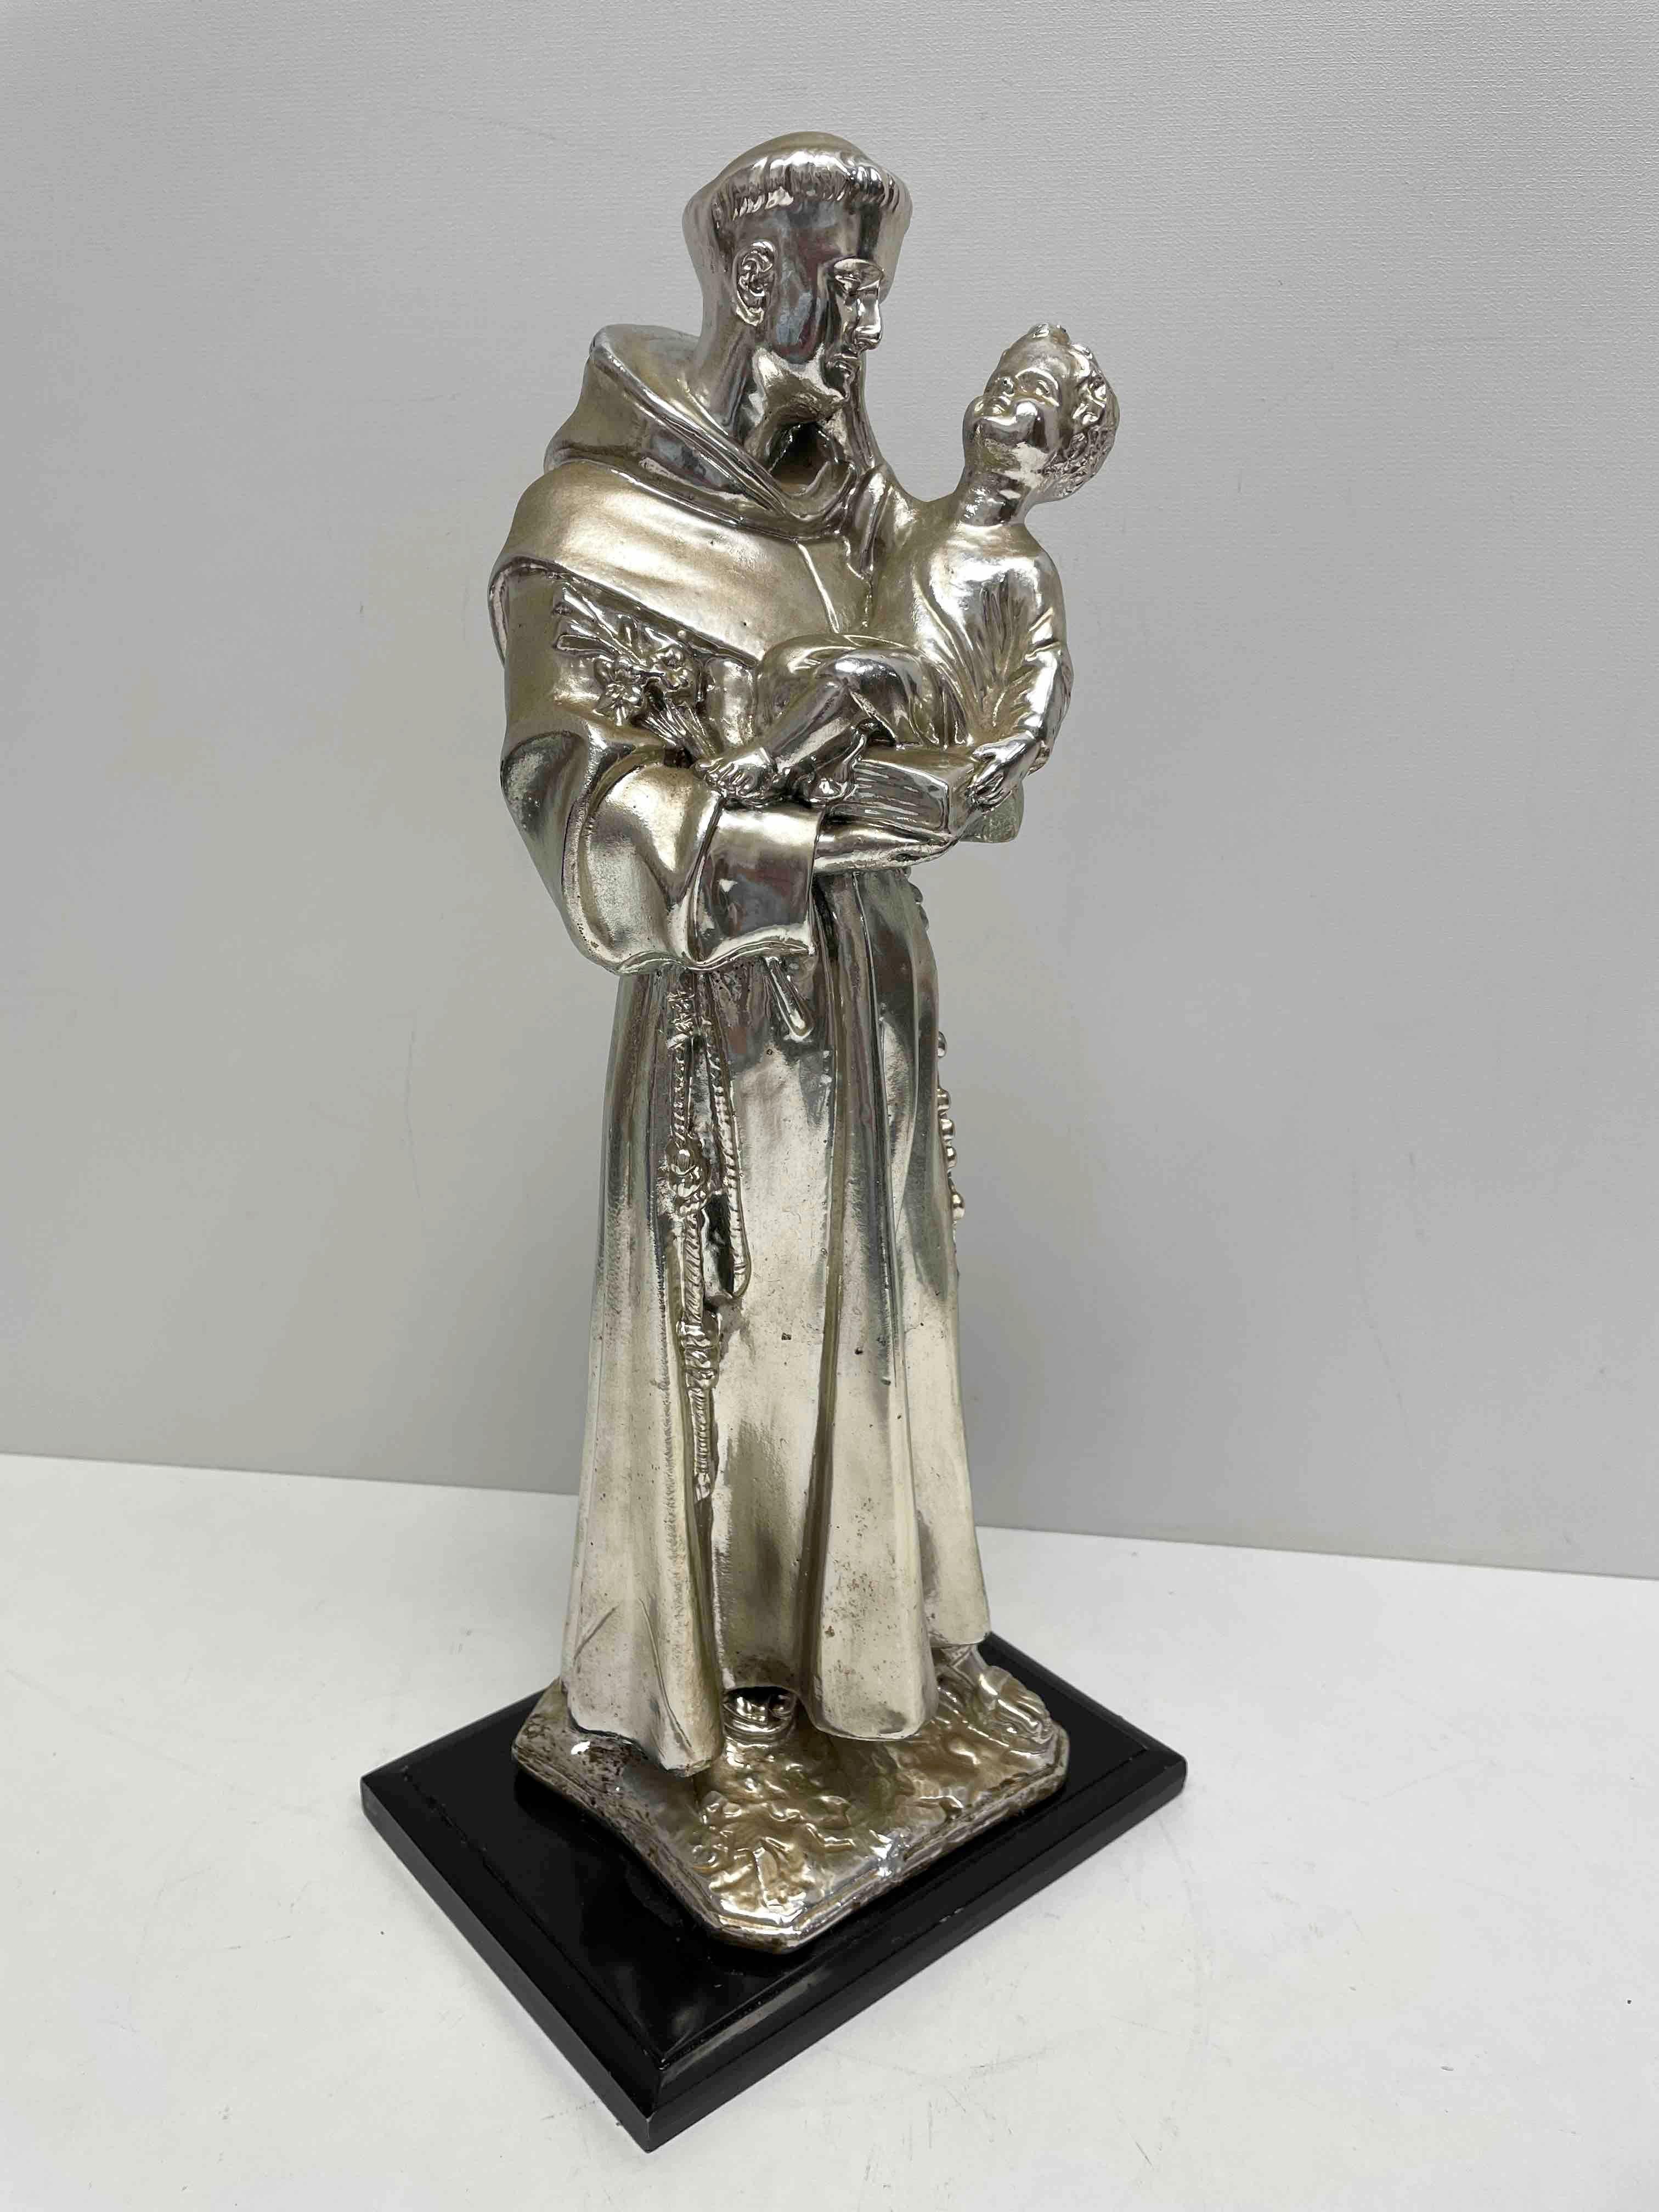 Early 20th Century Saint Anthony of Padua Statue Sculpture Holding Jesus Child, Italy, 1910s